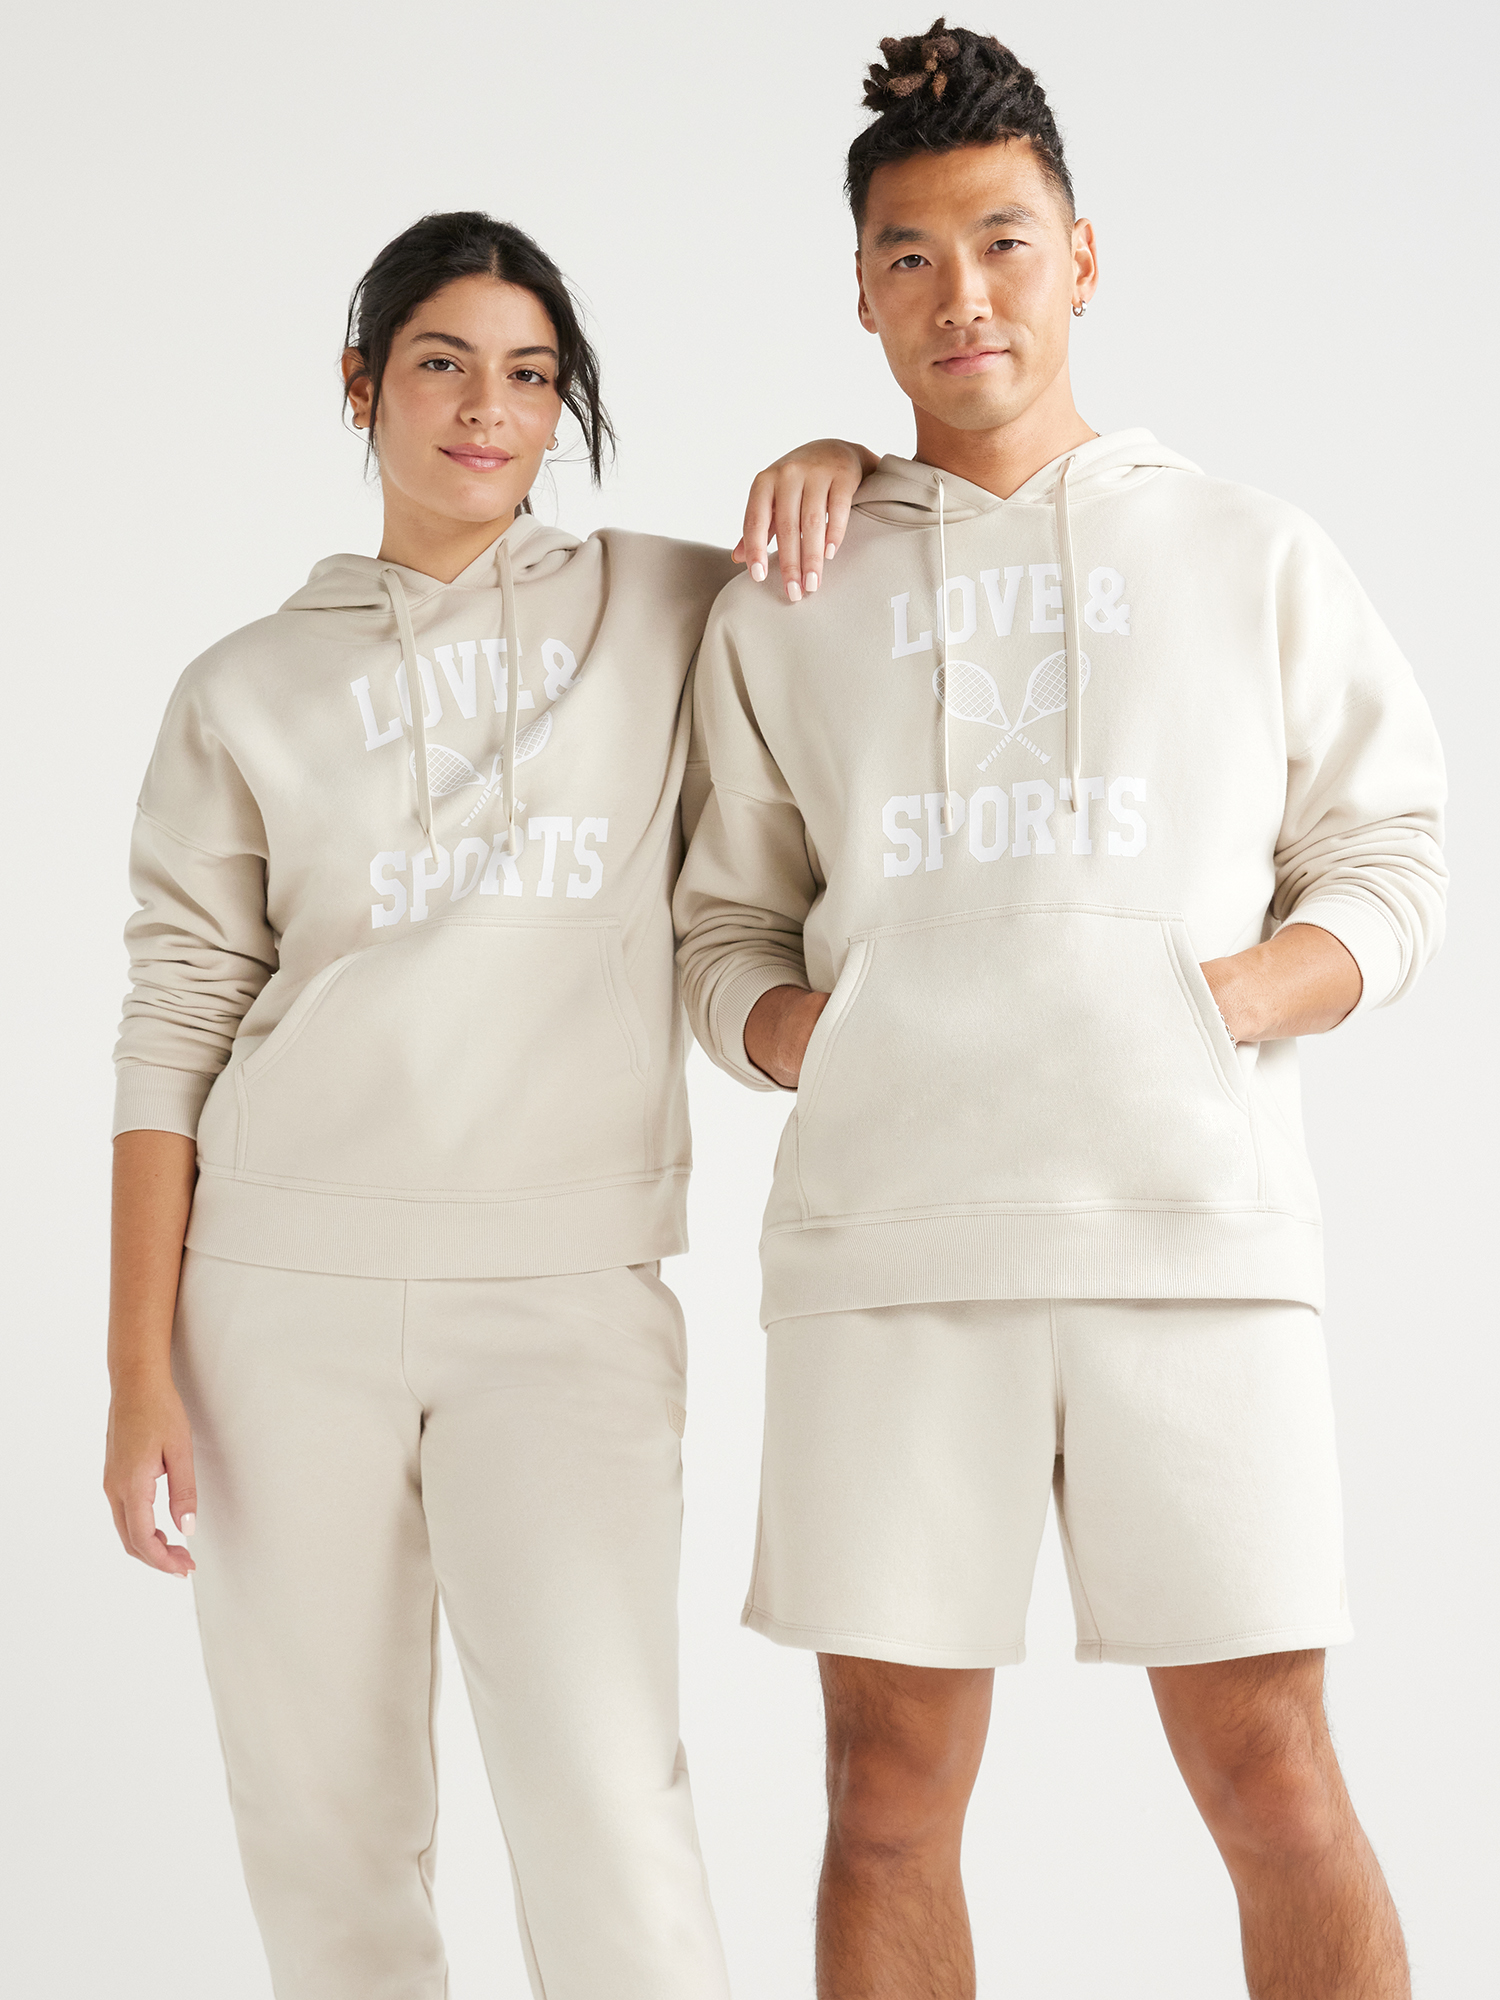 Love & Sports All Gender Pullover Graphic Hoodie, S-xxxl, Adult Unisex, Size: Large, Beige